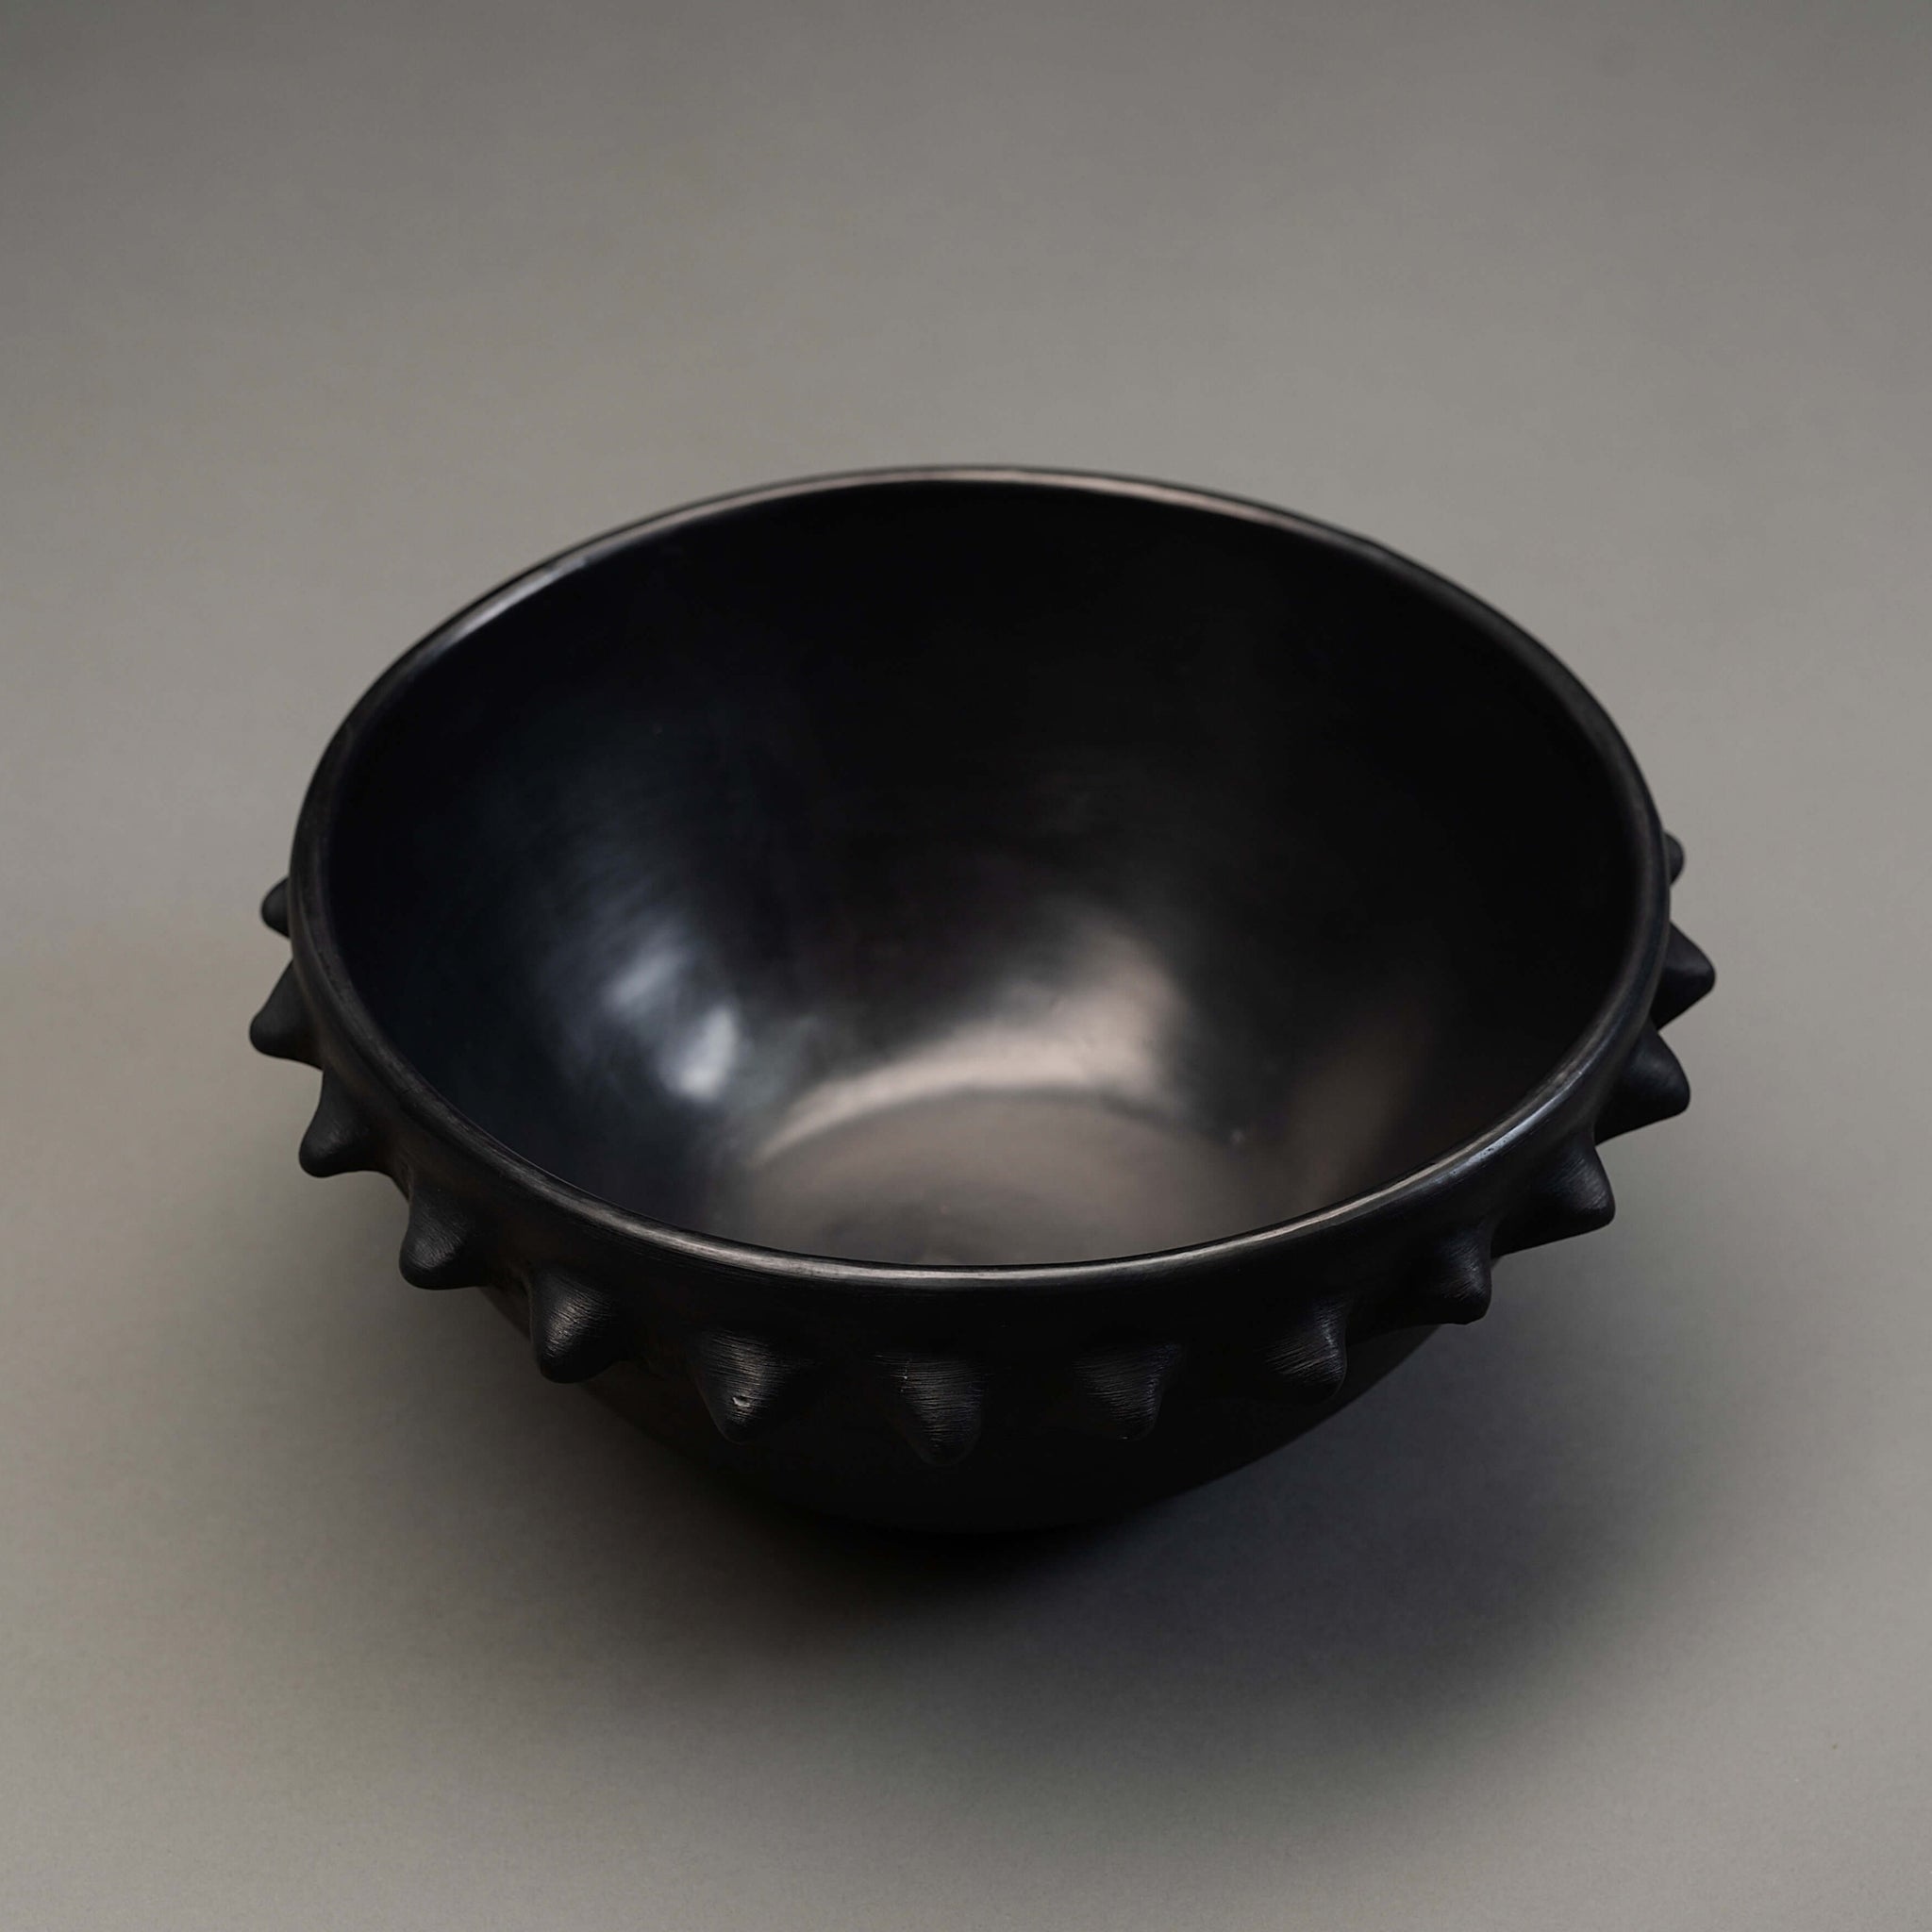 A black clay spiky serving bowl from Oaxaca.